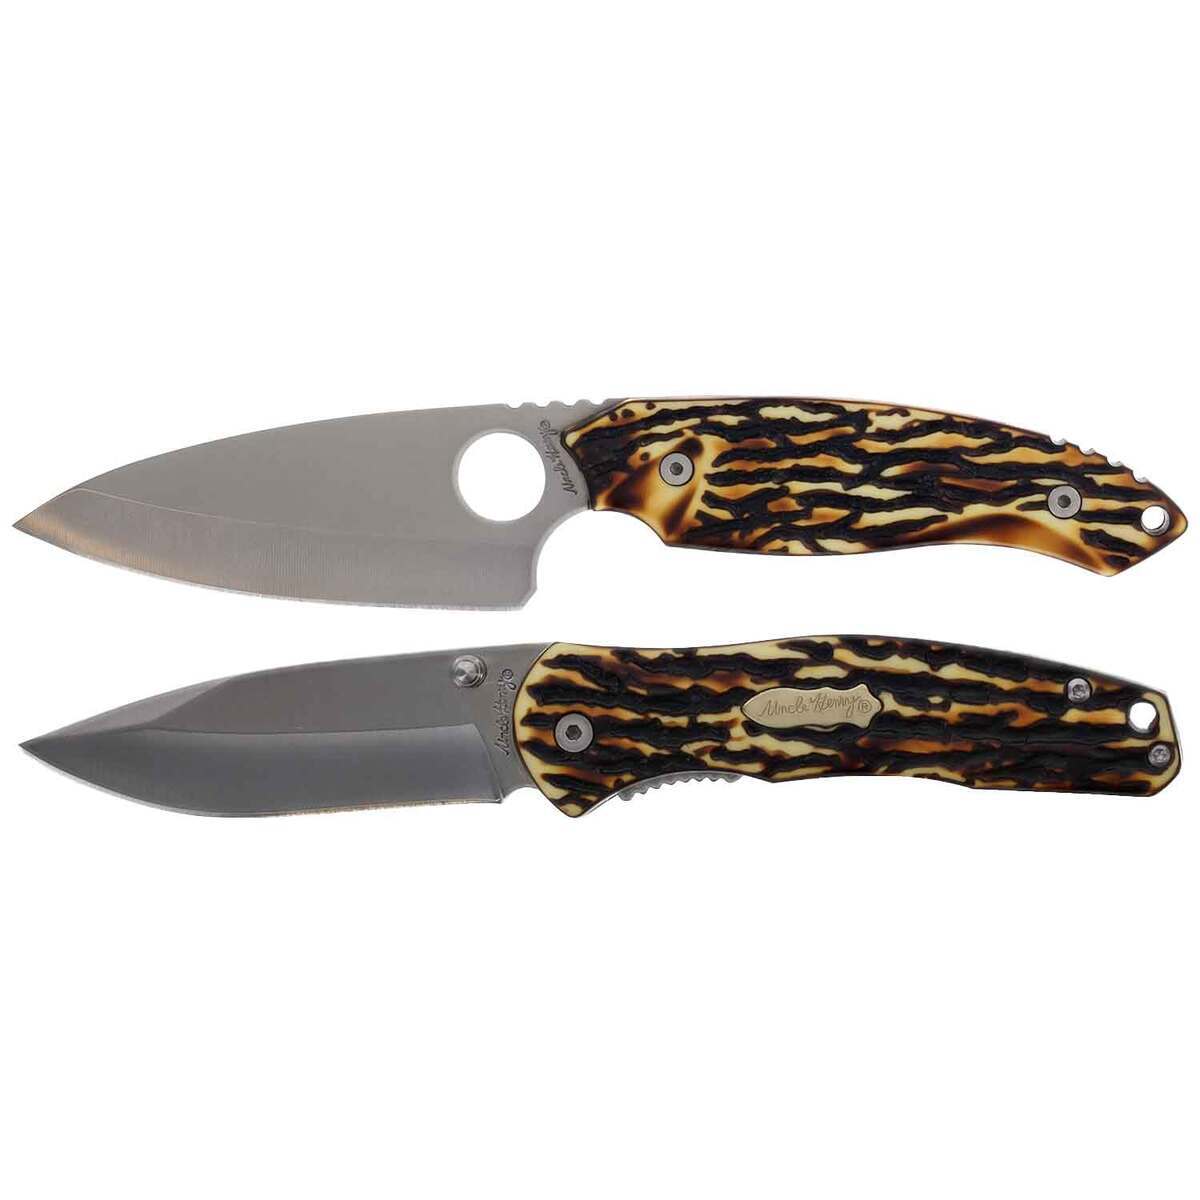 Uncle Henry 2 Piece Cleaver and Folding Knife Set